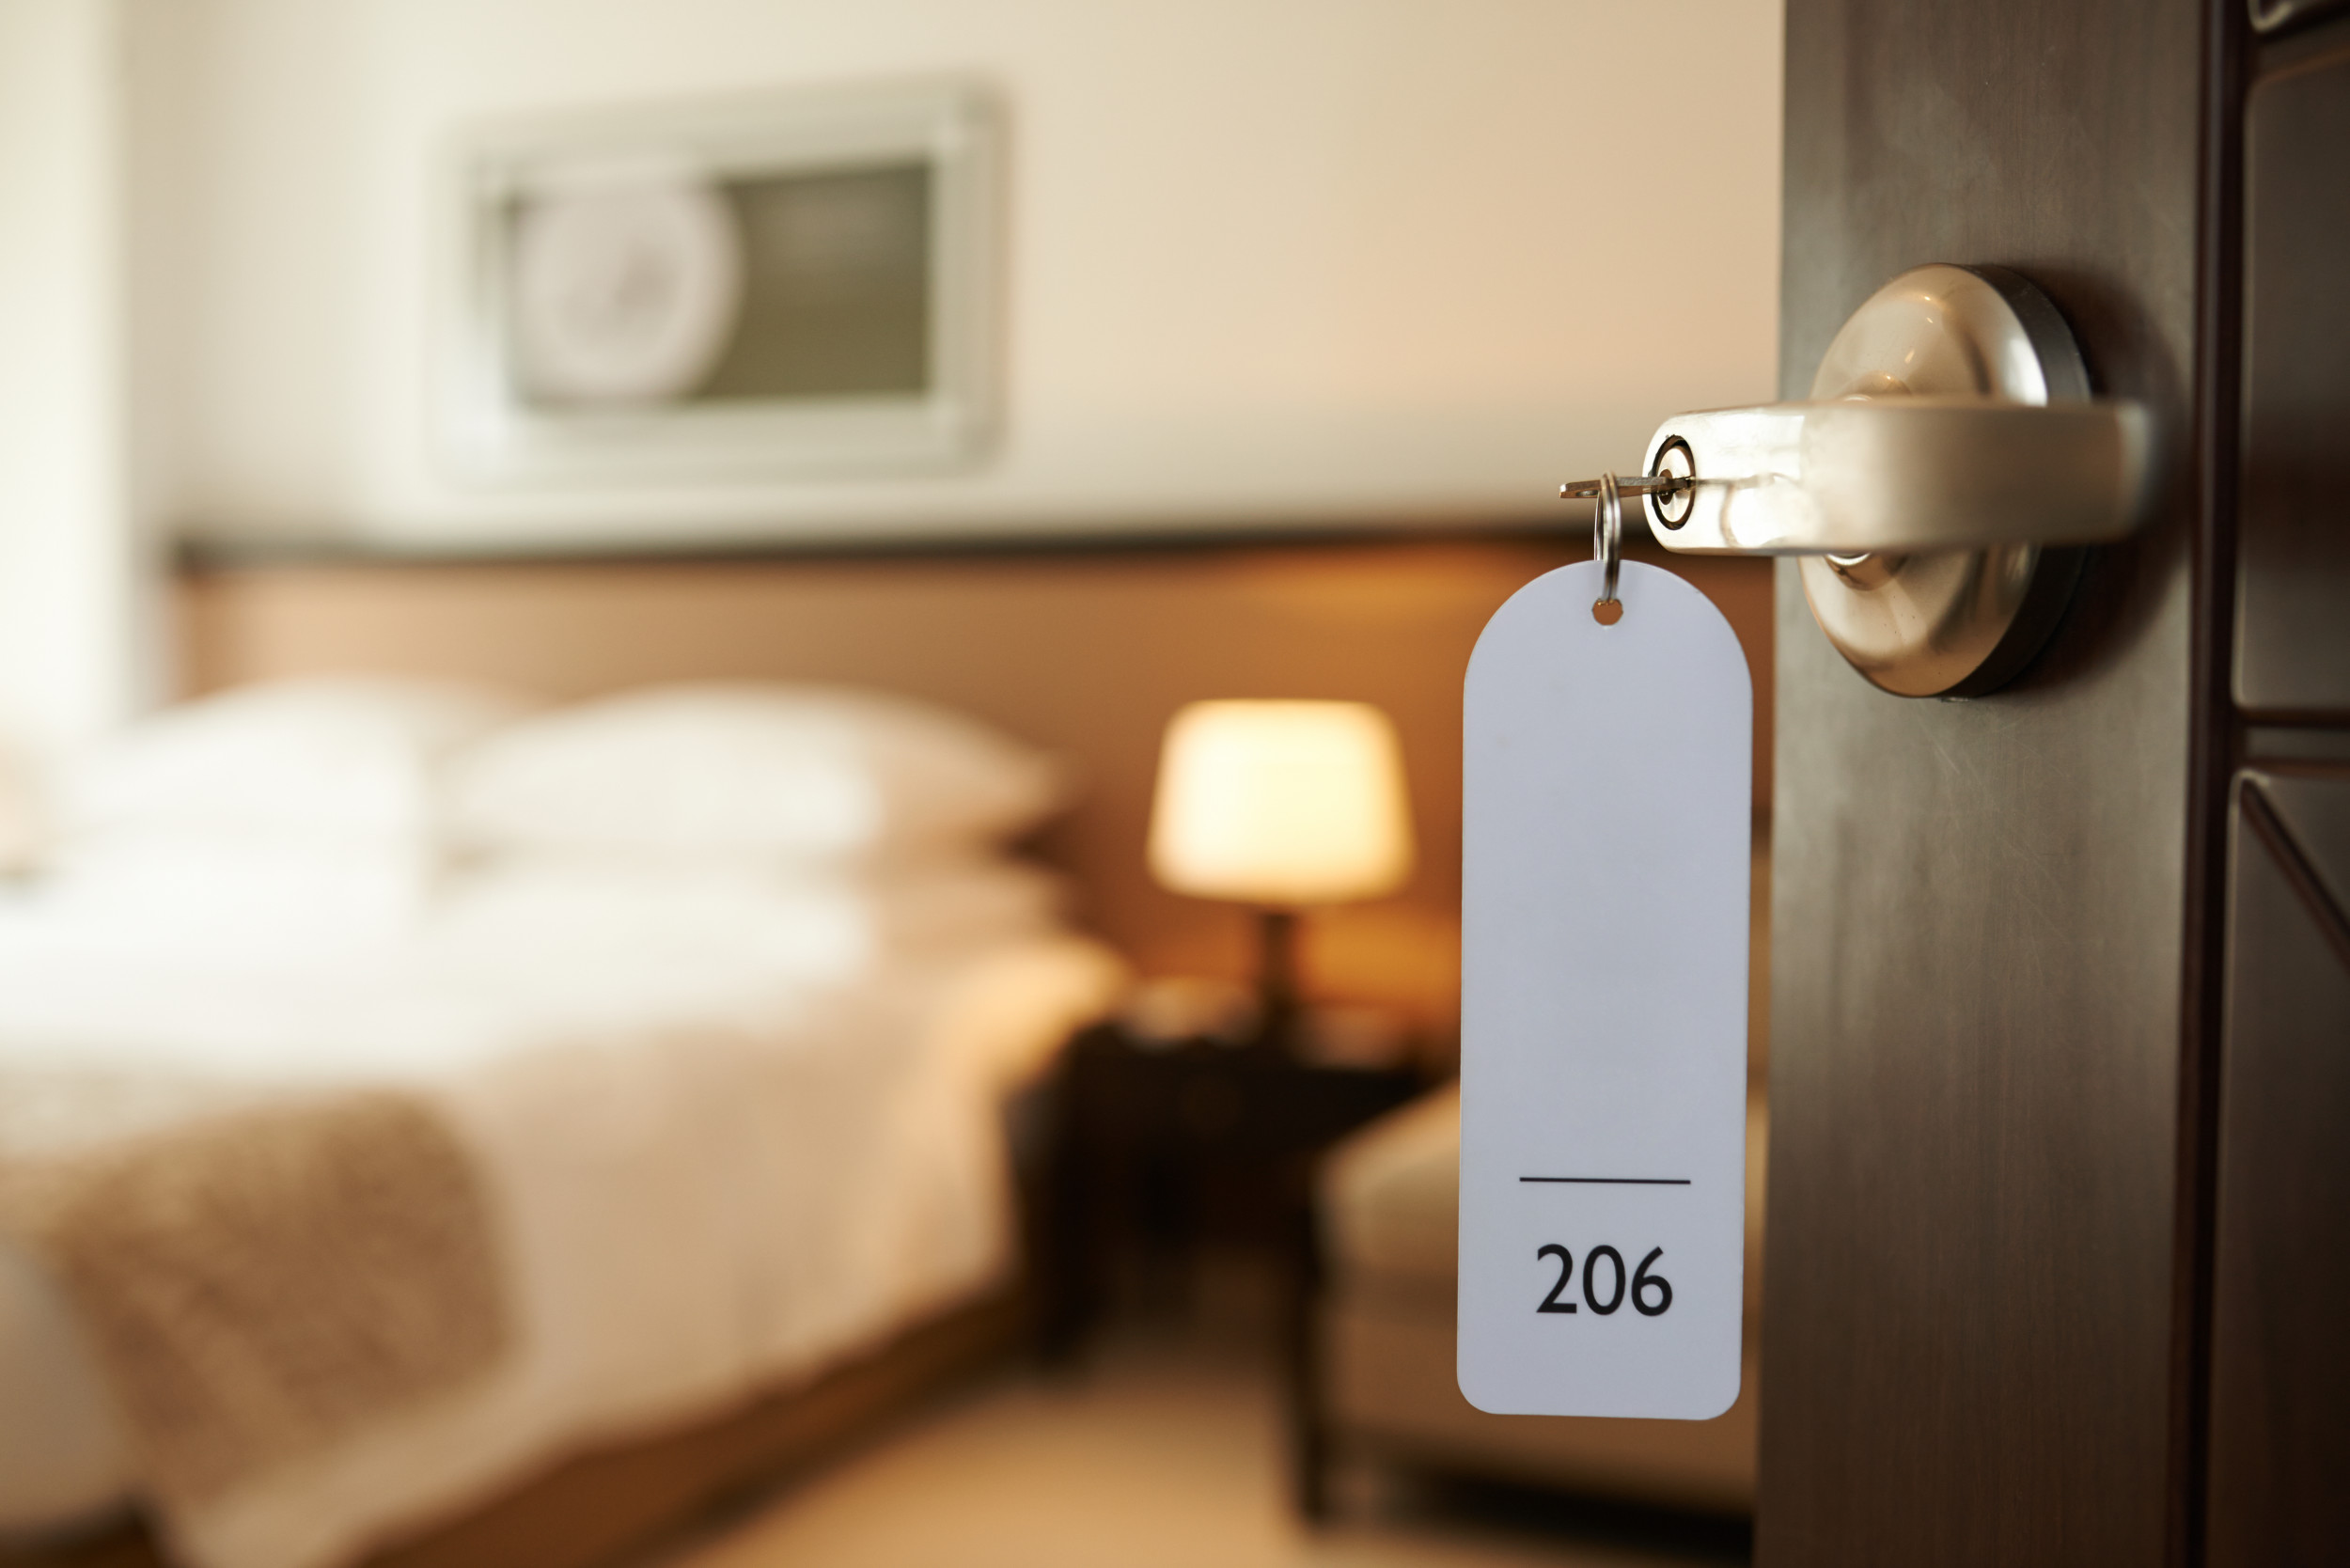 Flight Attendant Shares Security Checklist for Sketchy Hotel Rooms photo